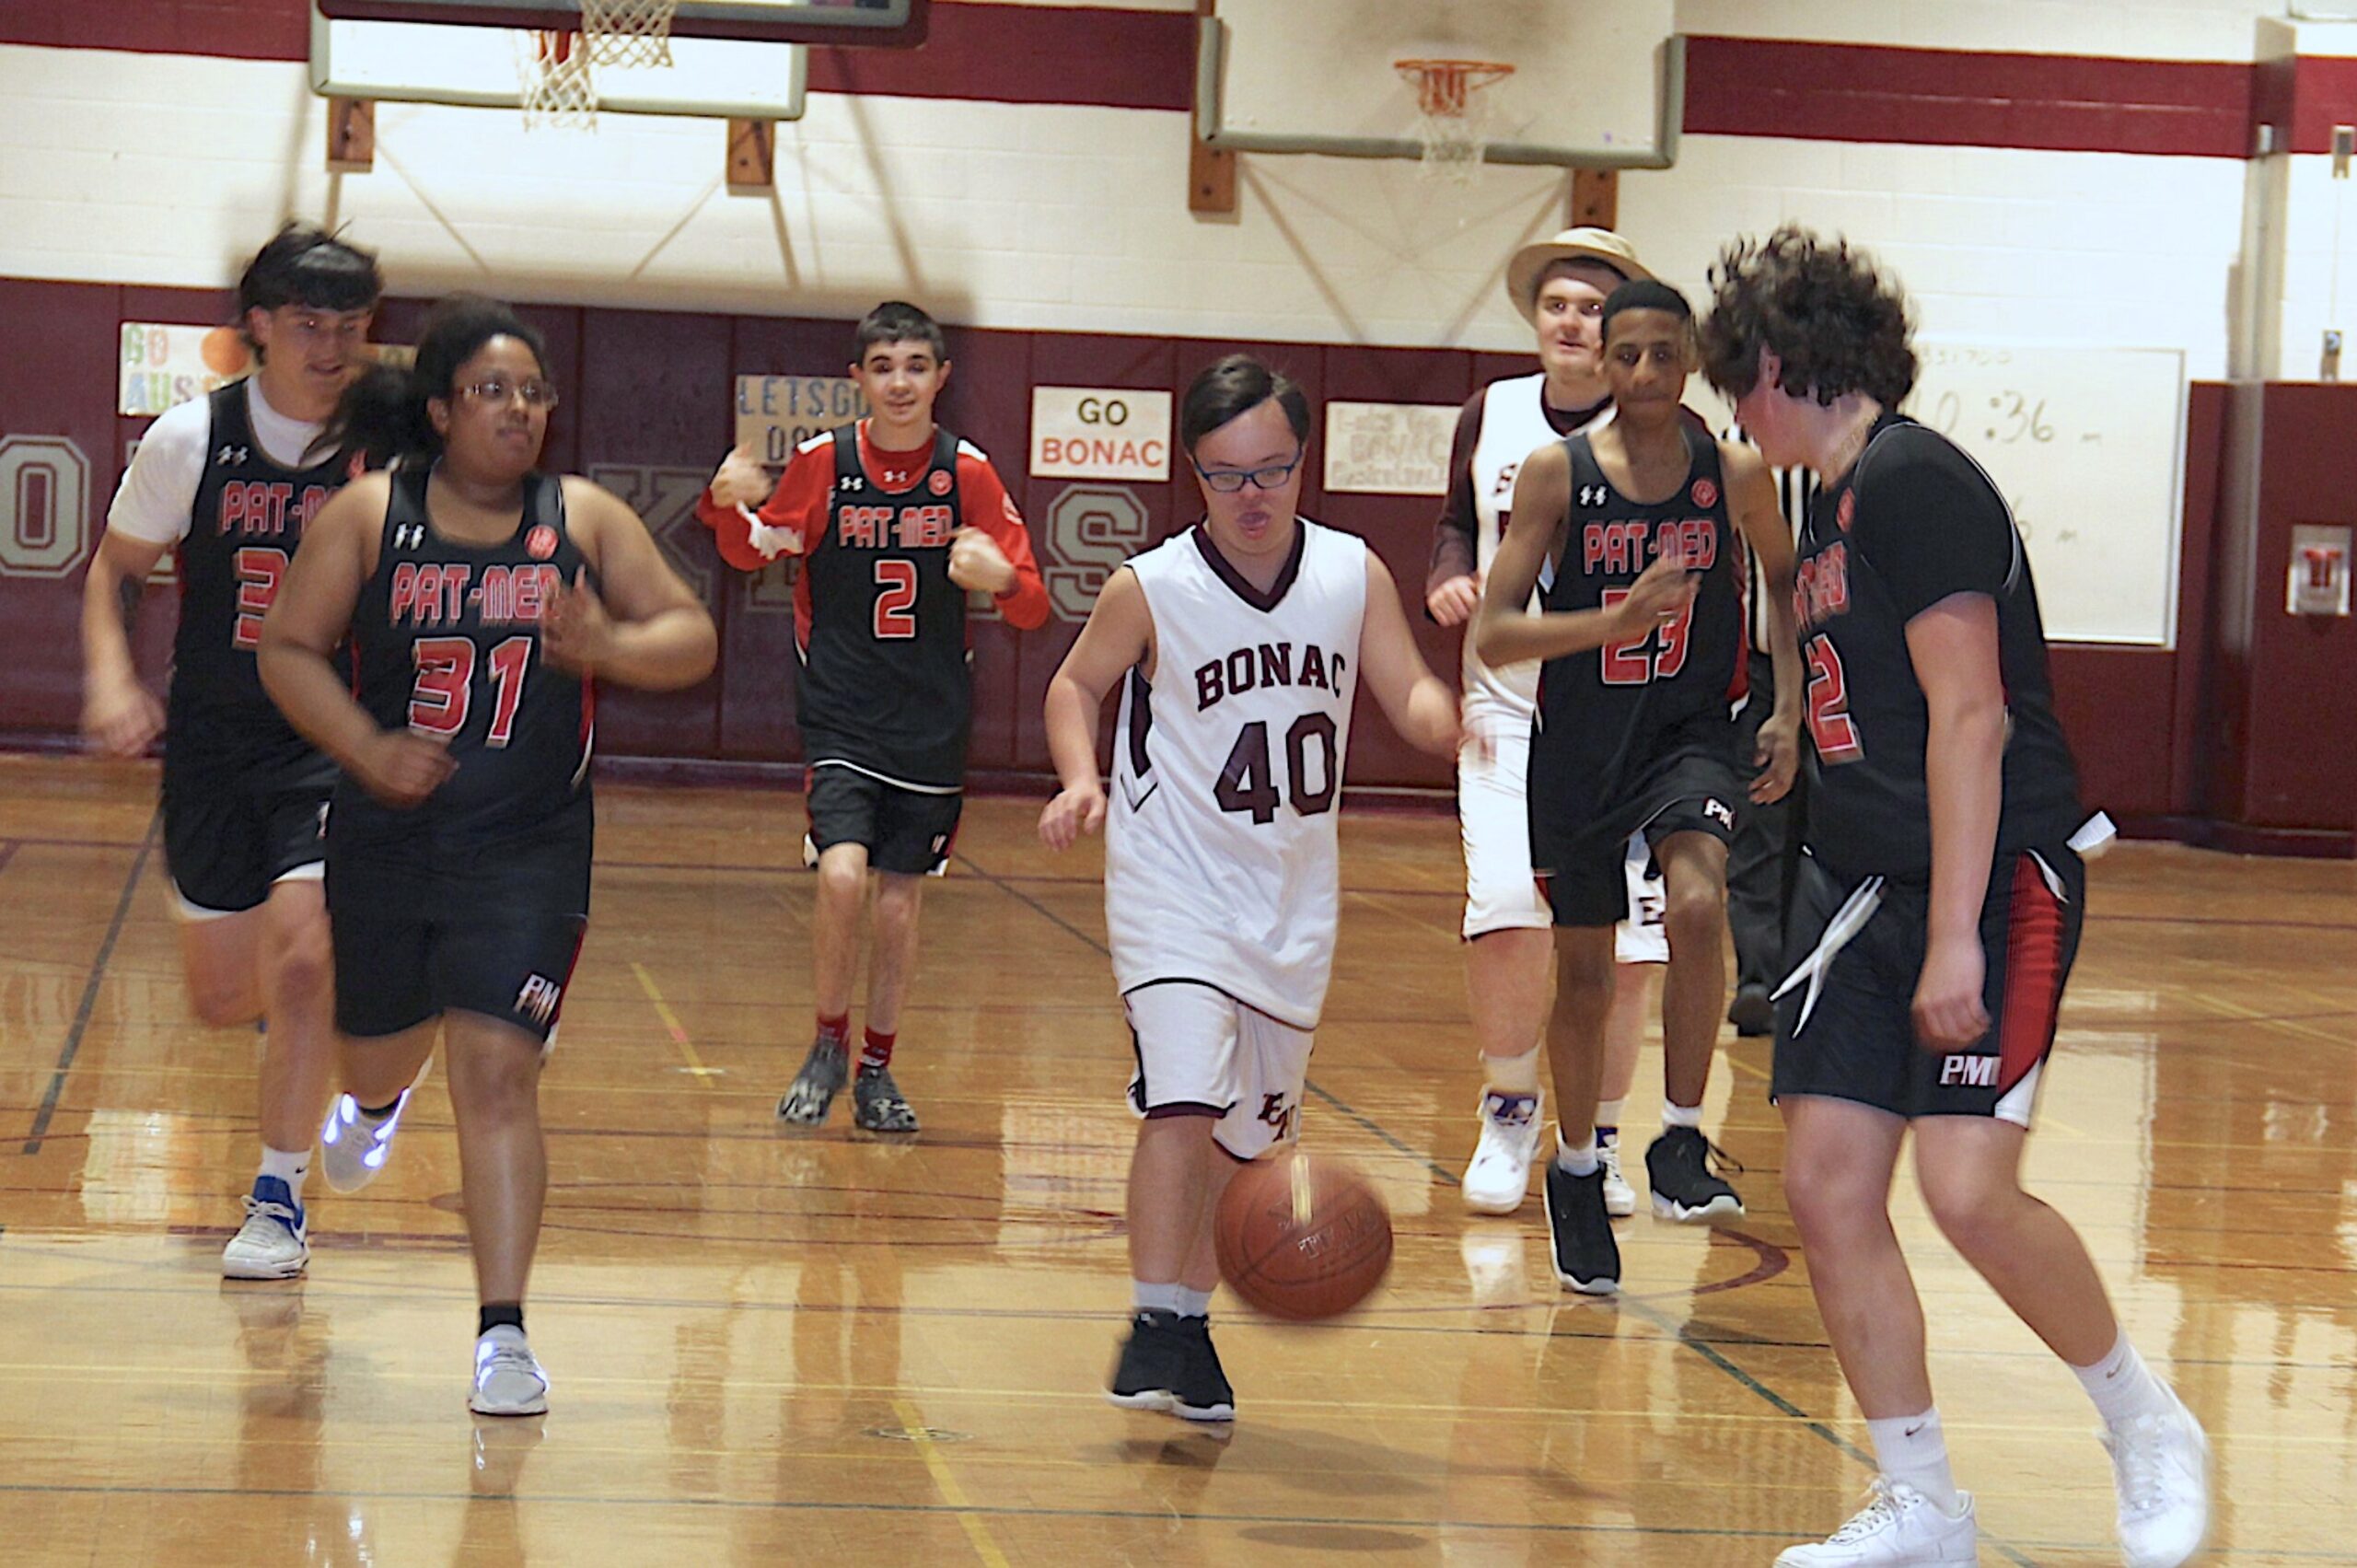 East Hampton High School student Sean Lester carries the ball up the court during a unified basketball game against Patchogue-Medford earlier this year. KYRIL BROMLEY